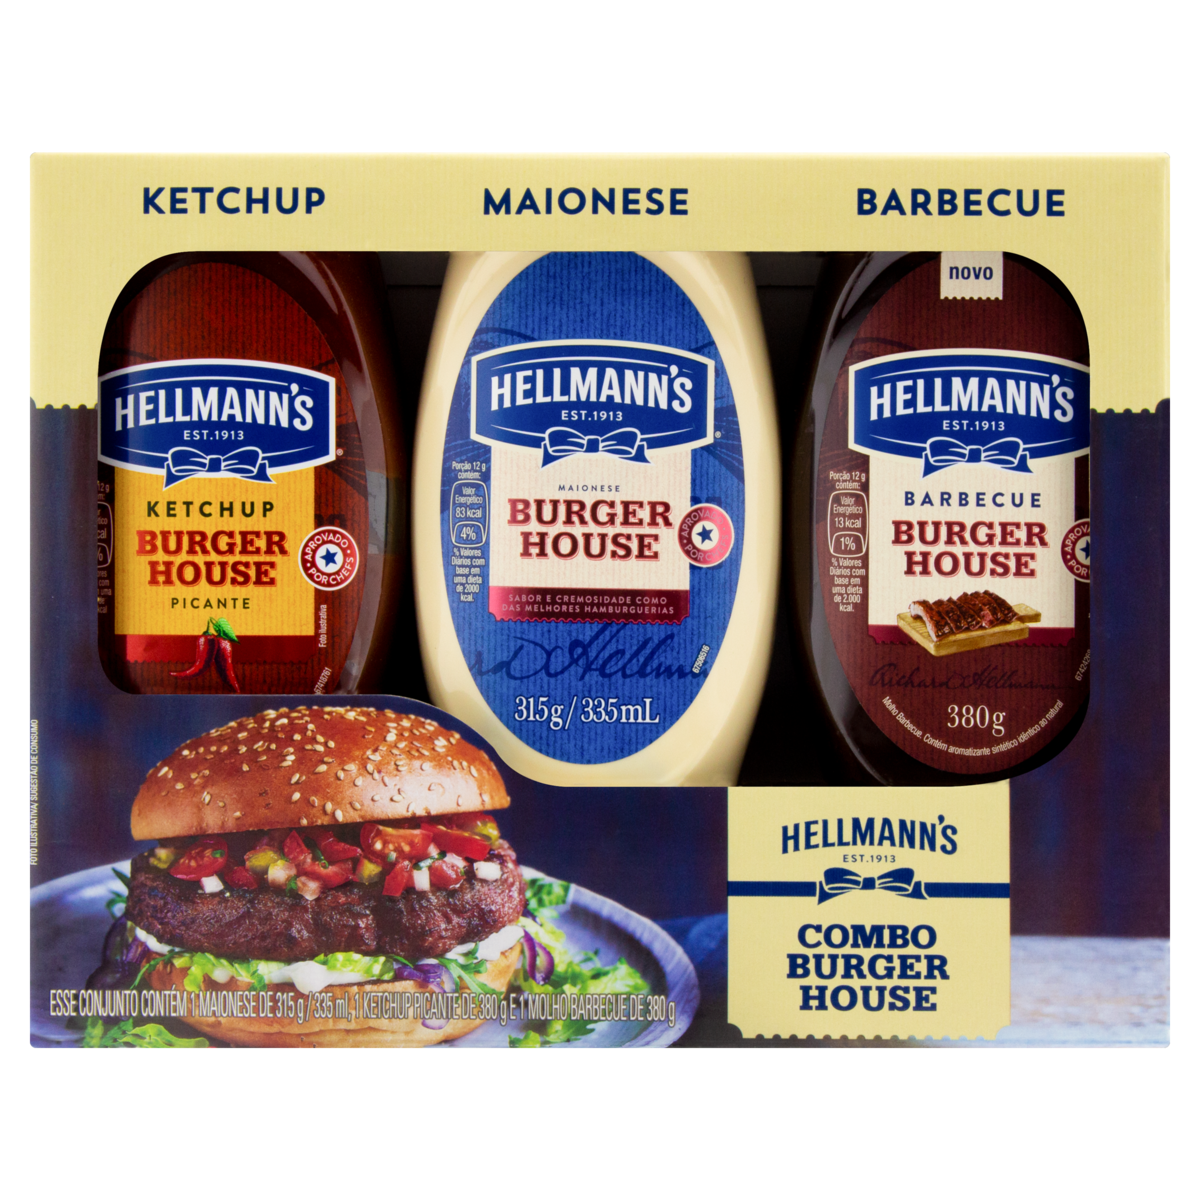 7891150062122 - KIT BARBECUE 380G + MAIONESE 315G + KETCHUP PICANTE 380G HELLMANNS BURGER HOUSE